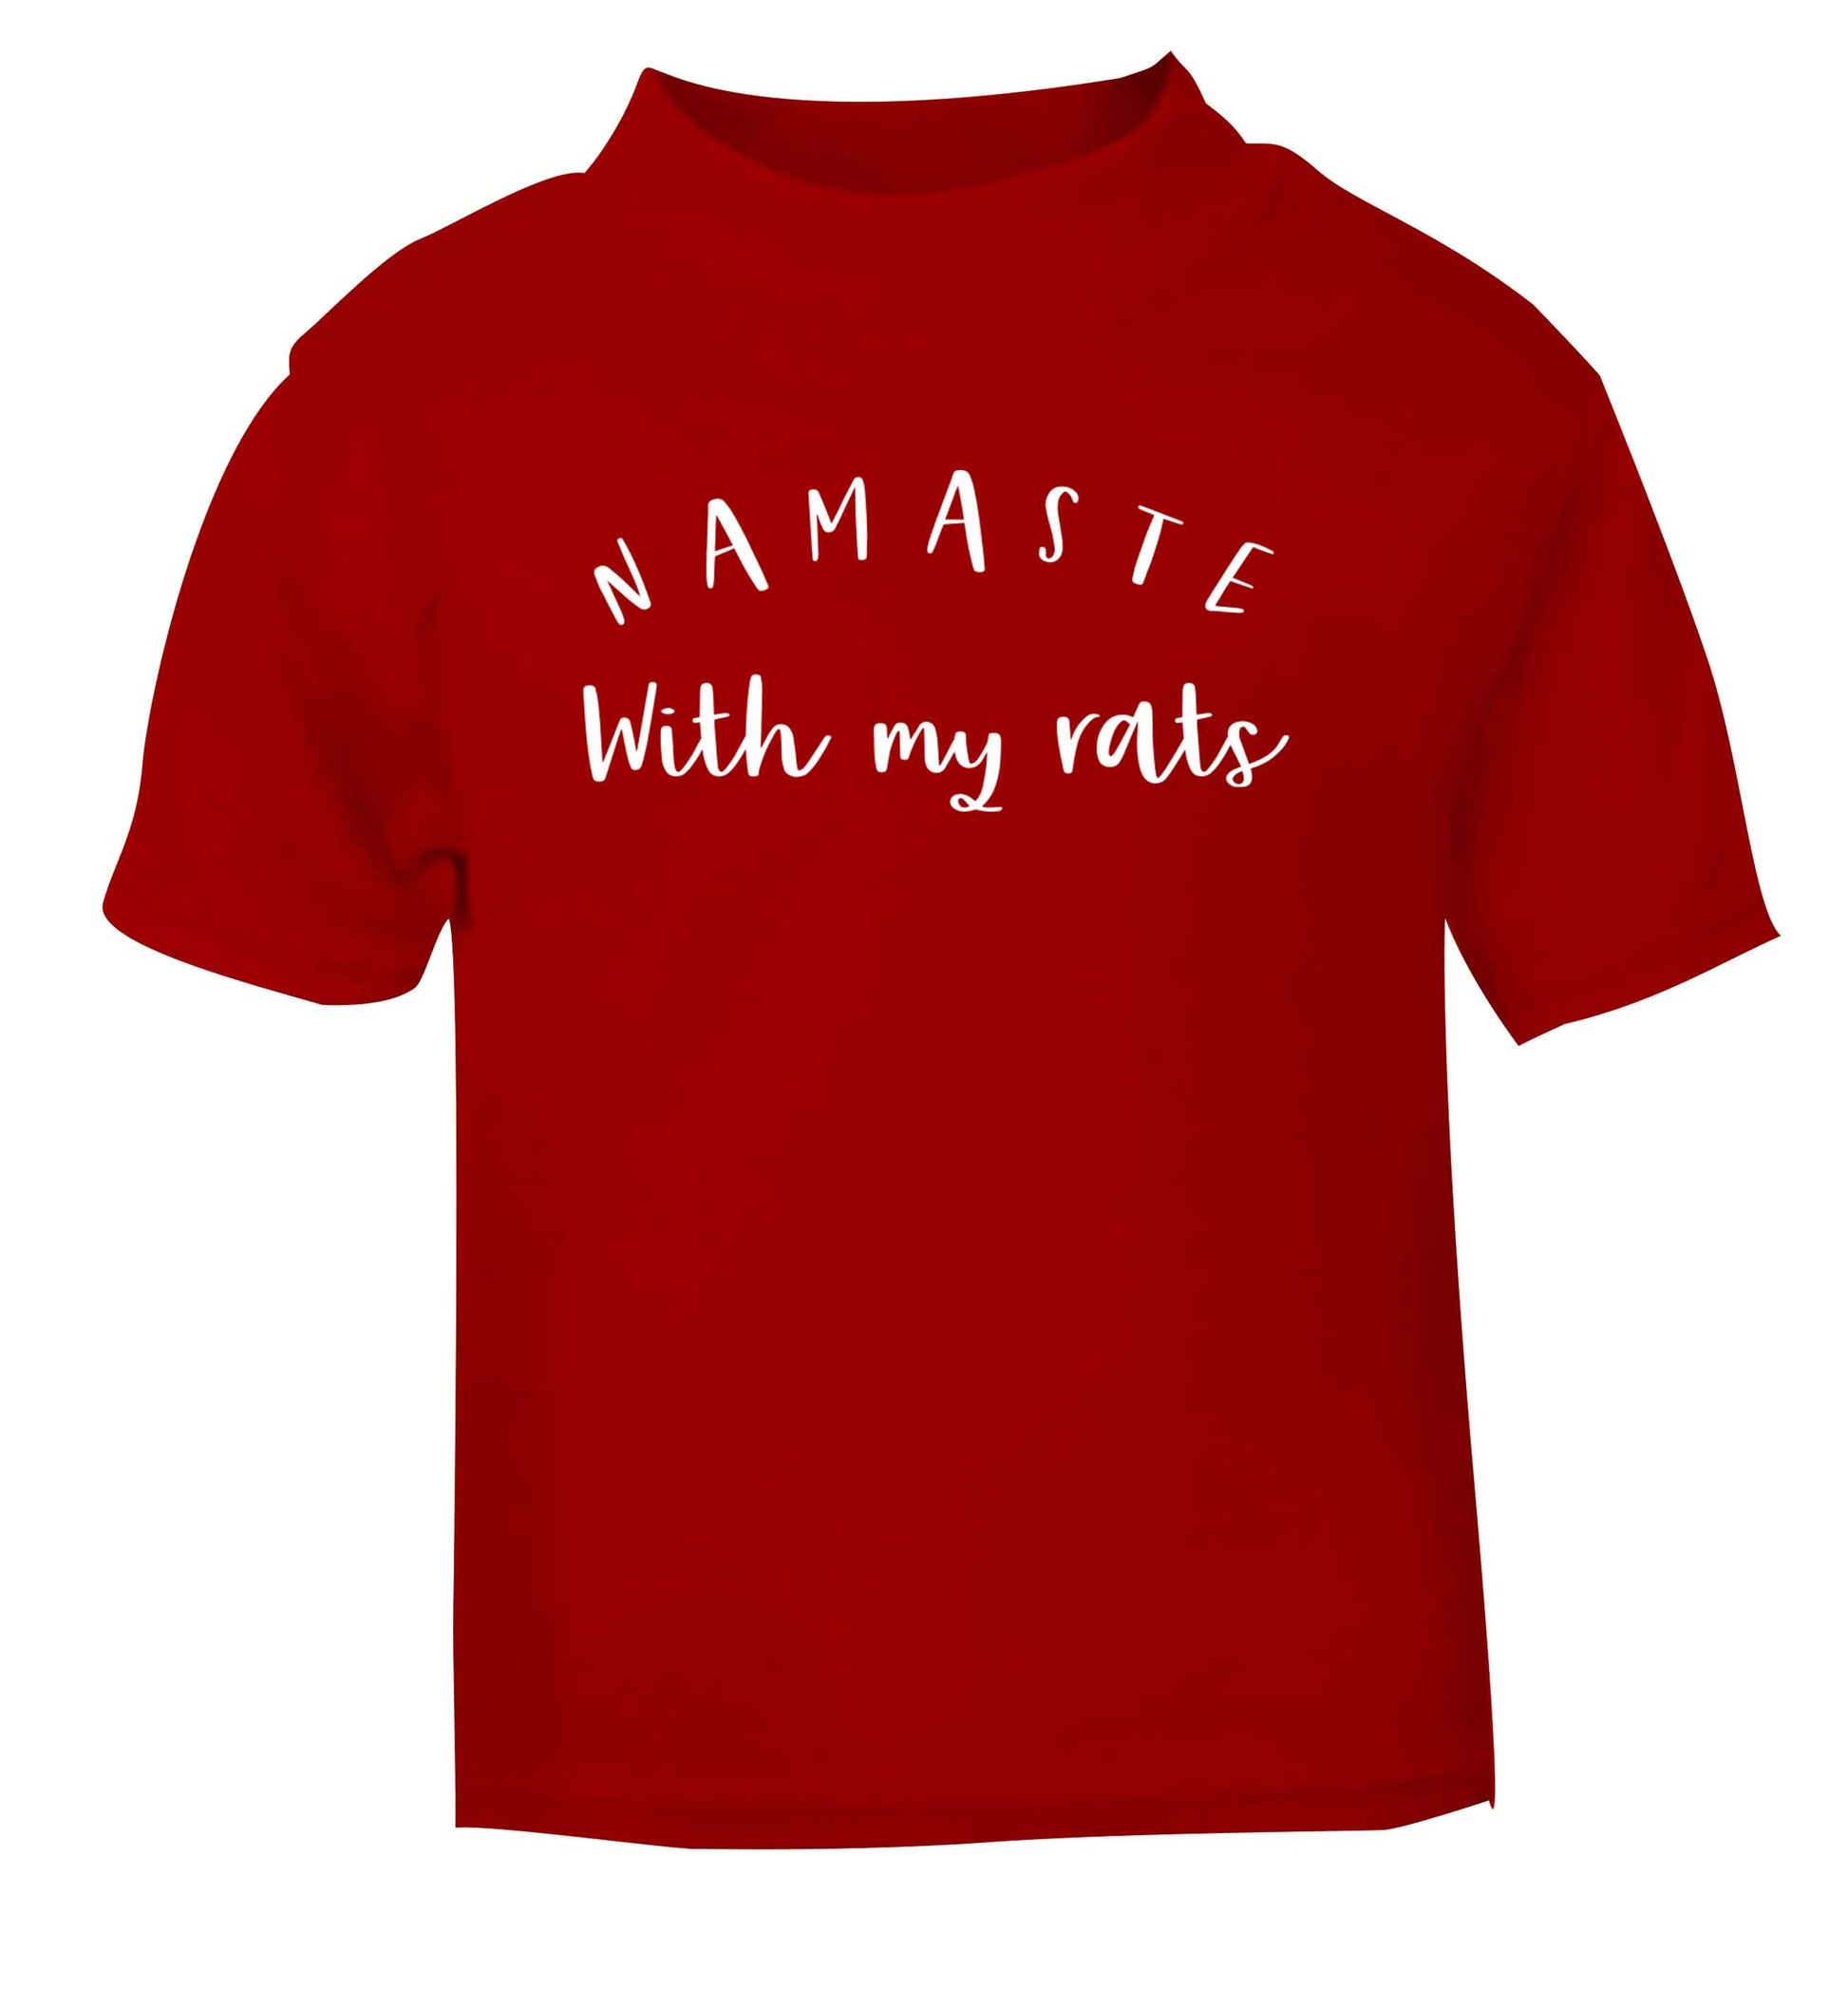 Namaste with my rats red Baby Toddler Tshirt 2 Years